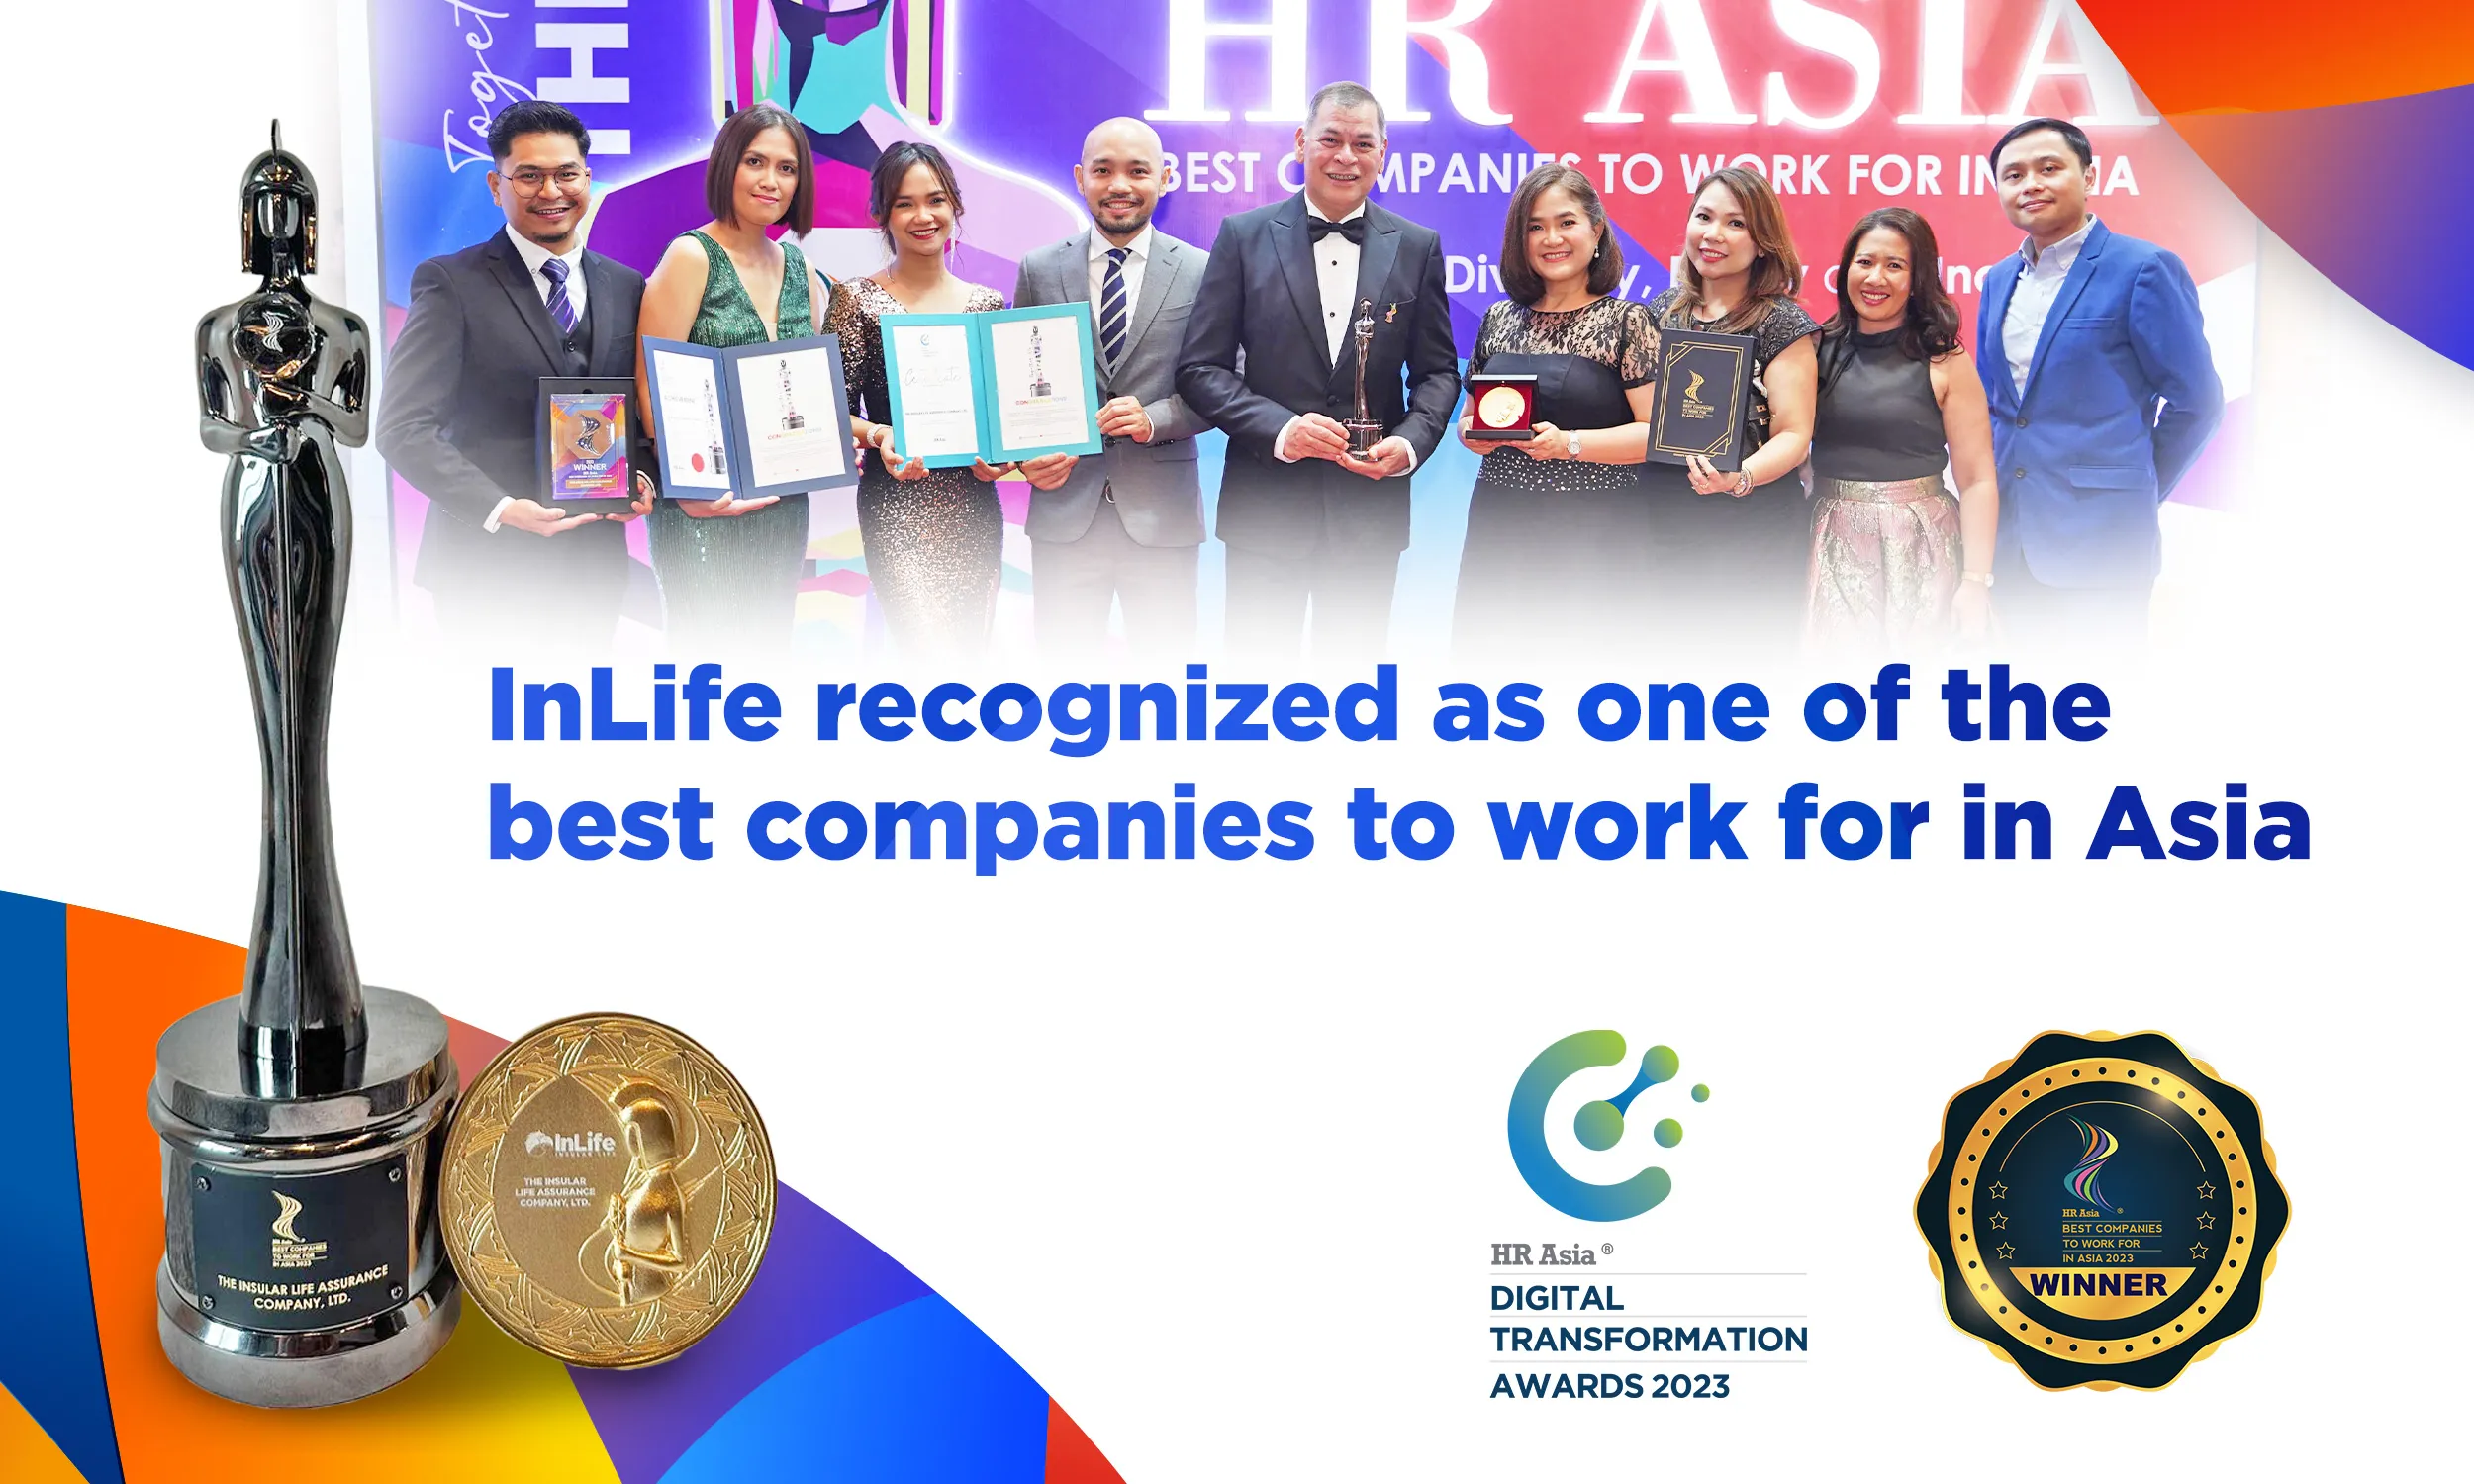 inlife-recognized-as-one-of-the-best-companies-to-work-for-in-asia